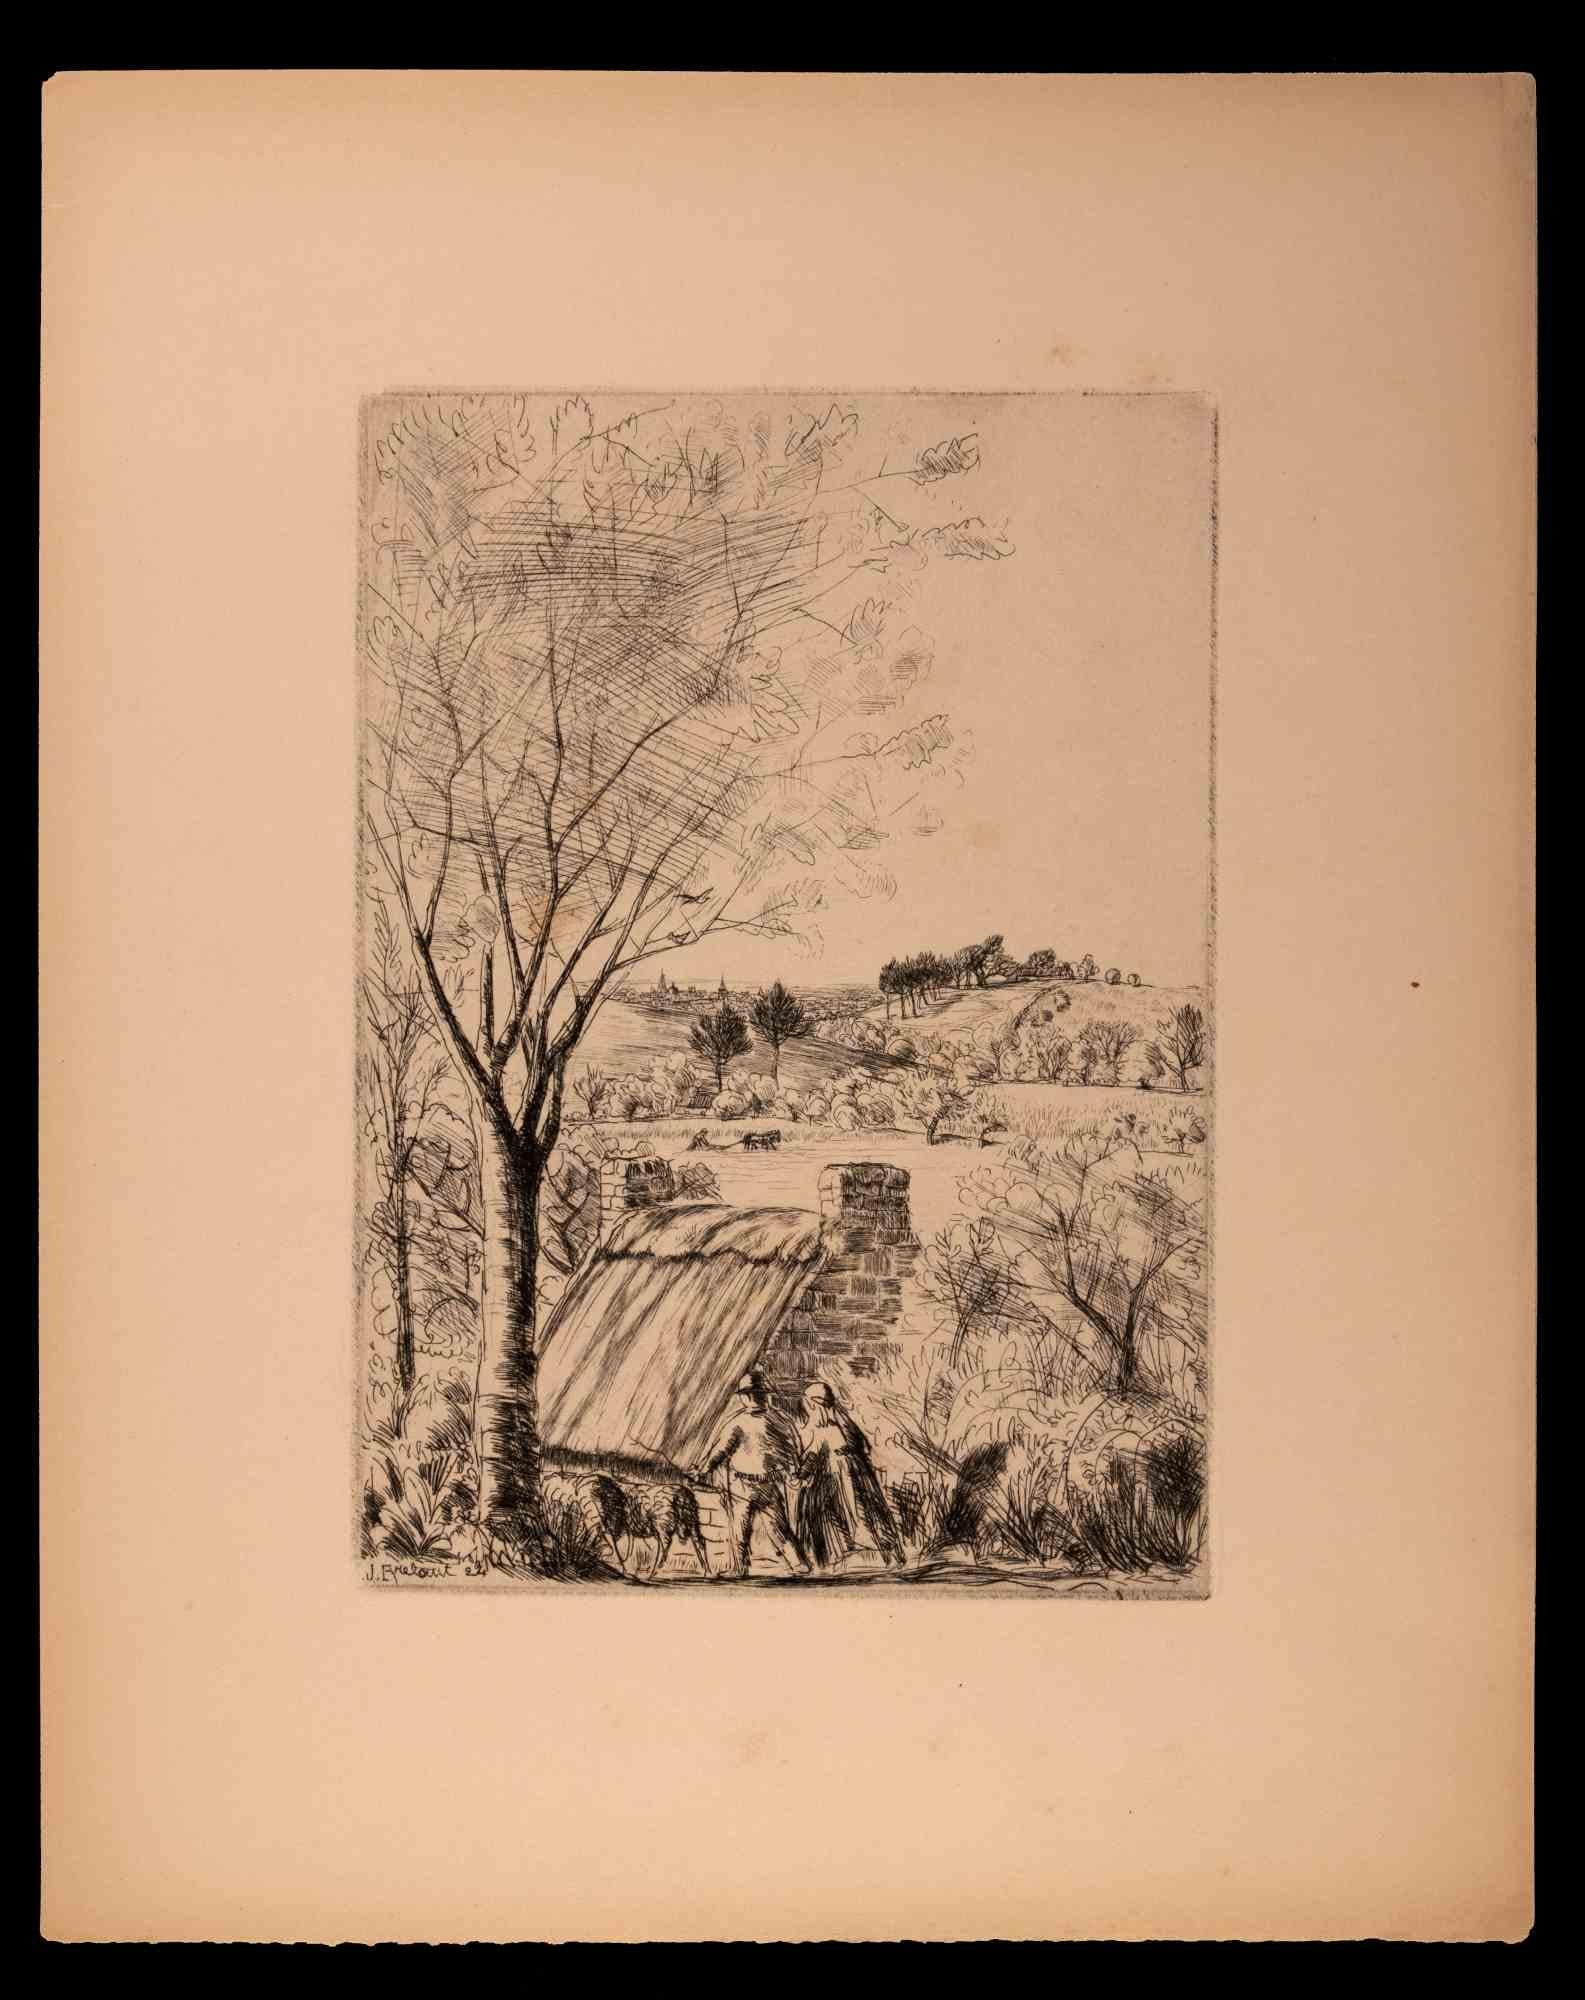 Countryside  - Original Etching by Jean Frélaut - 19th Century